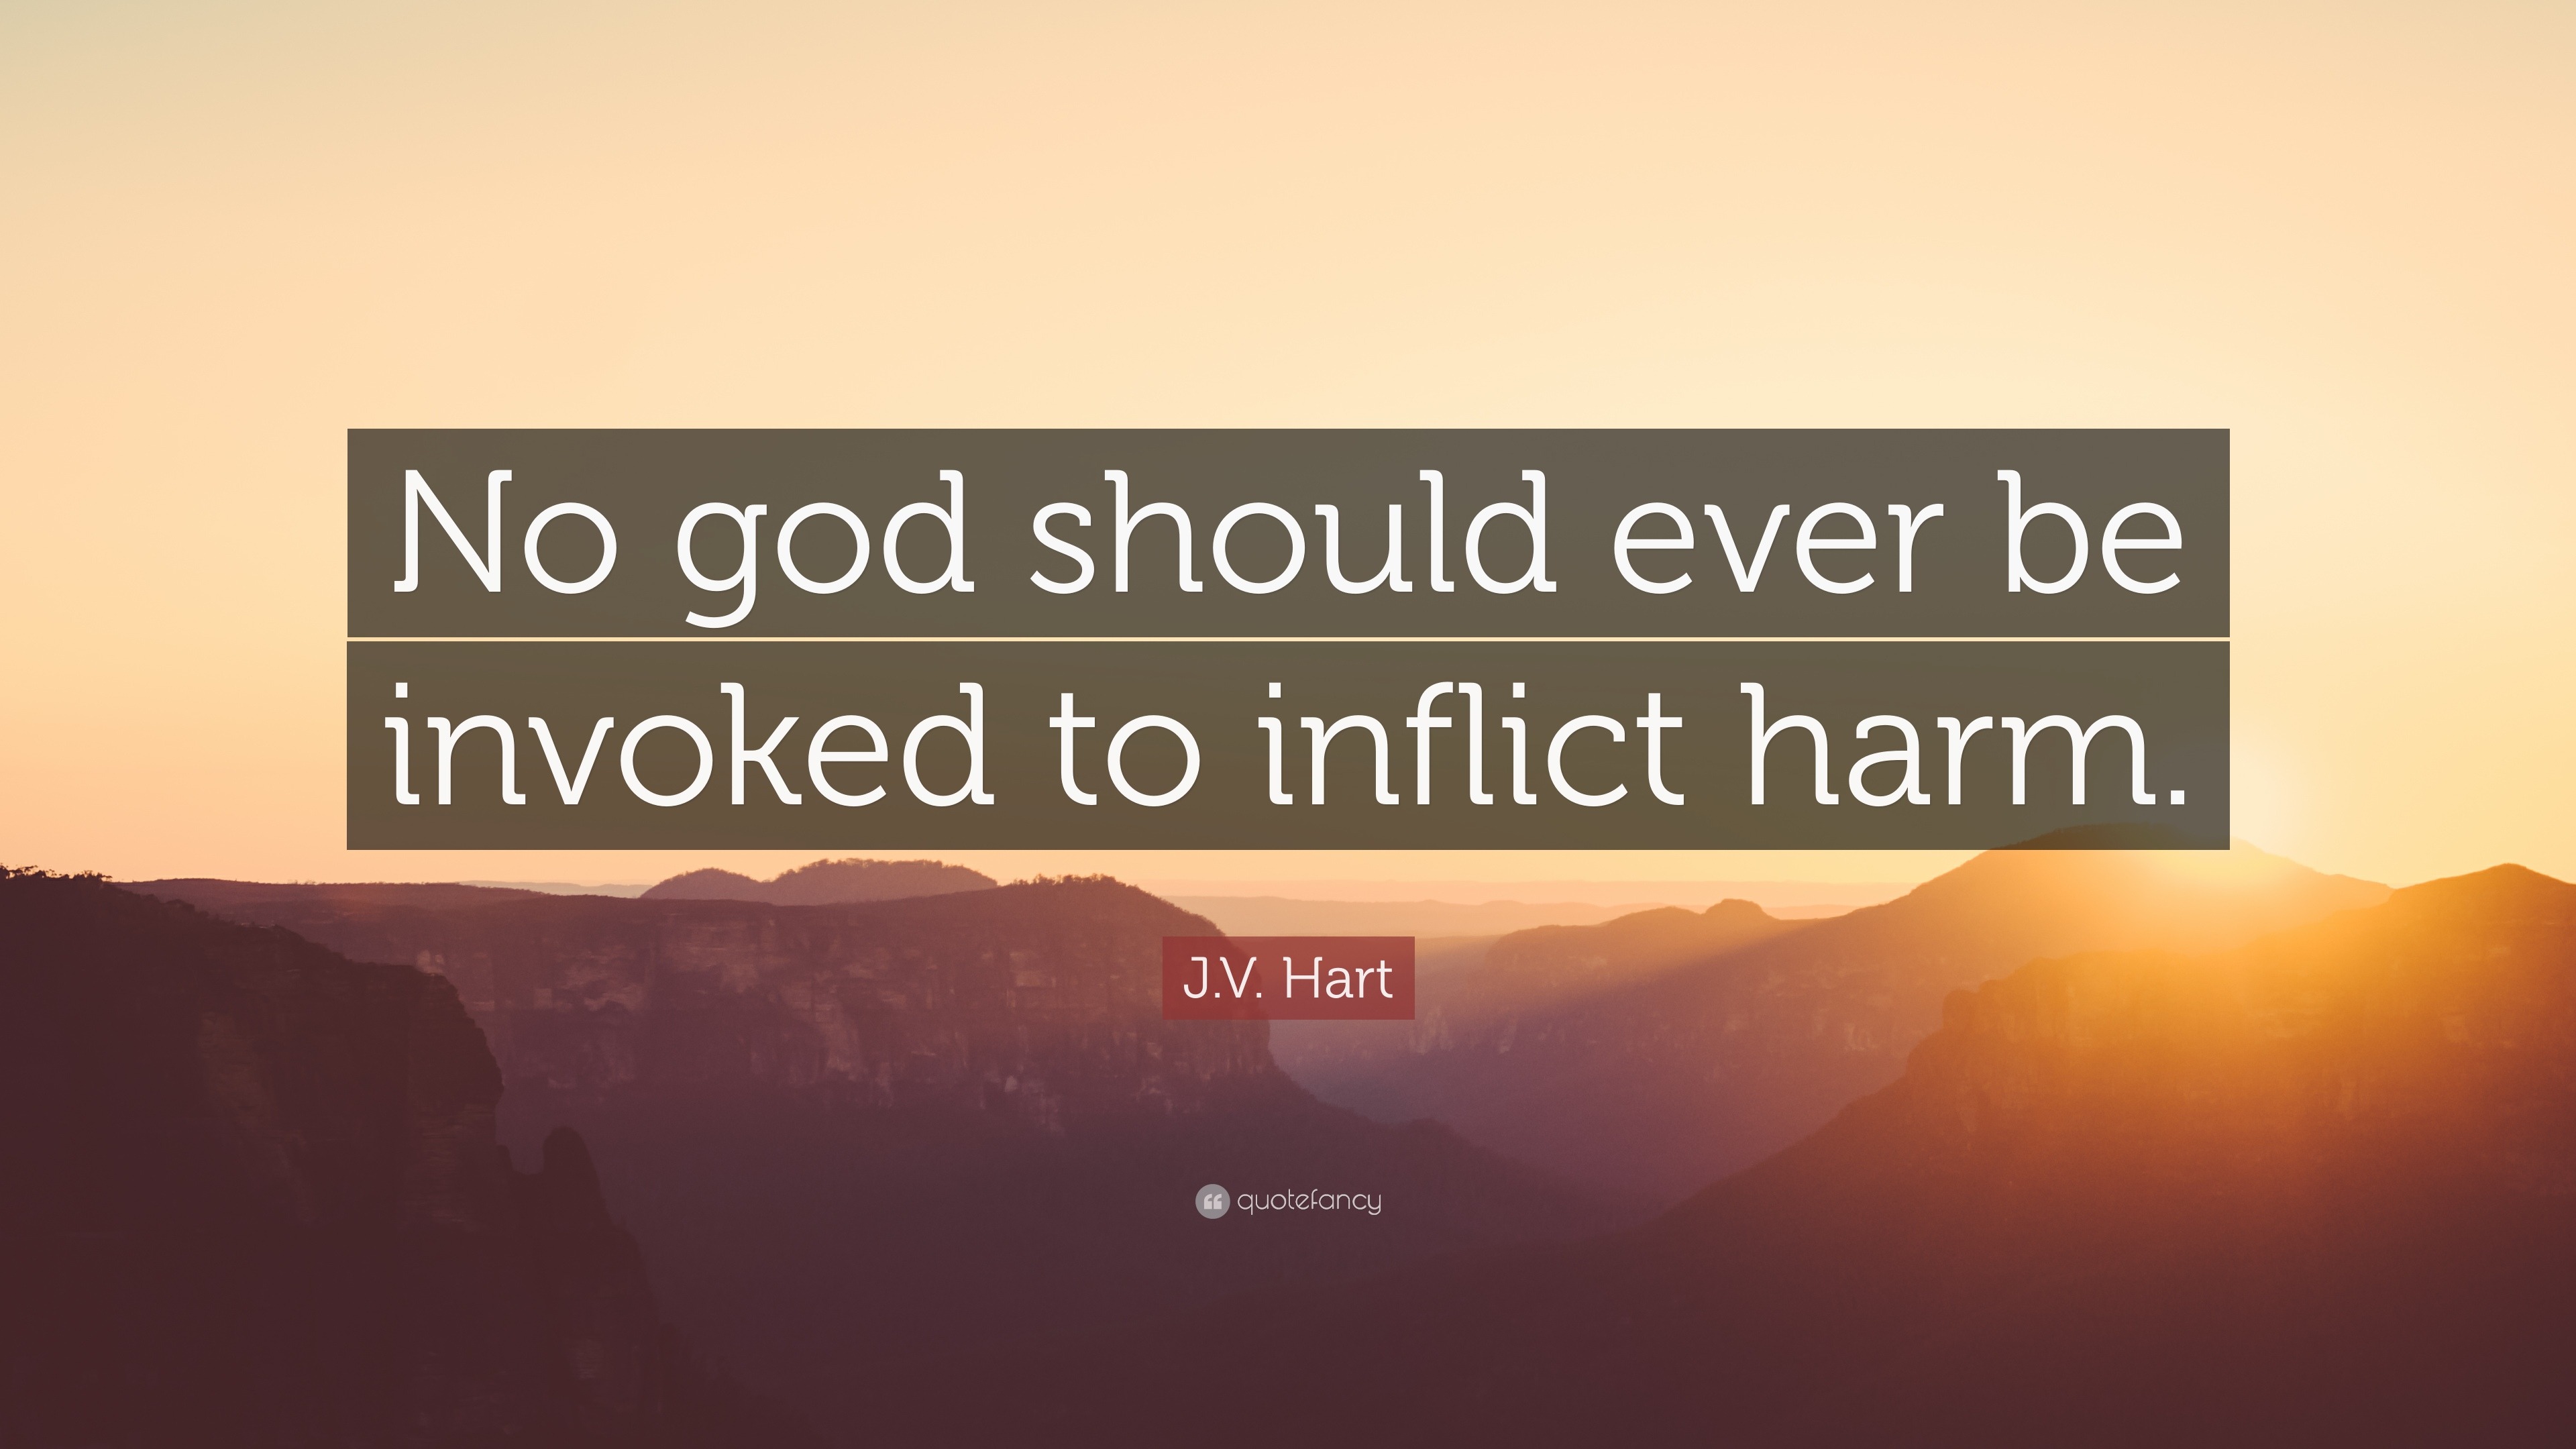 J.V. Hart quote: We risk life and limb and my princely good looks